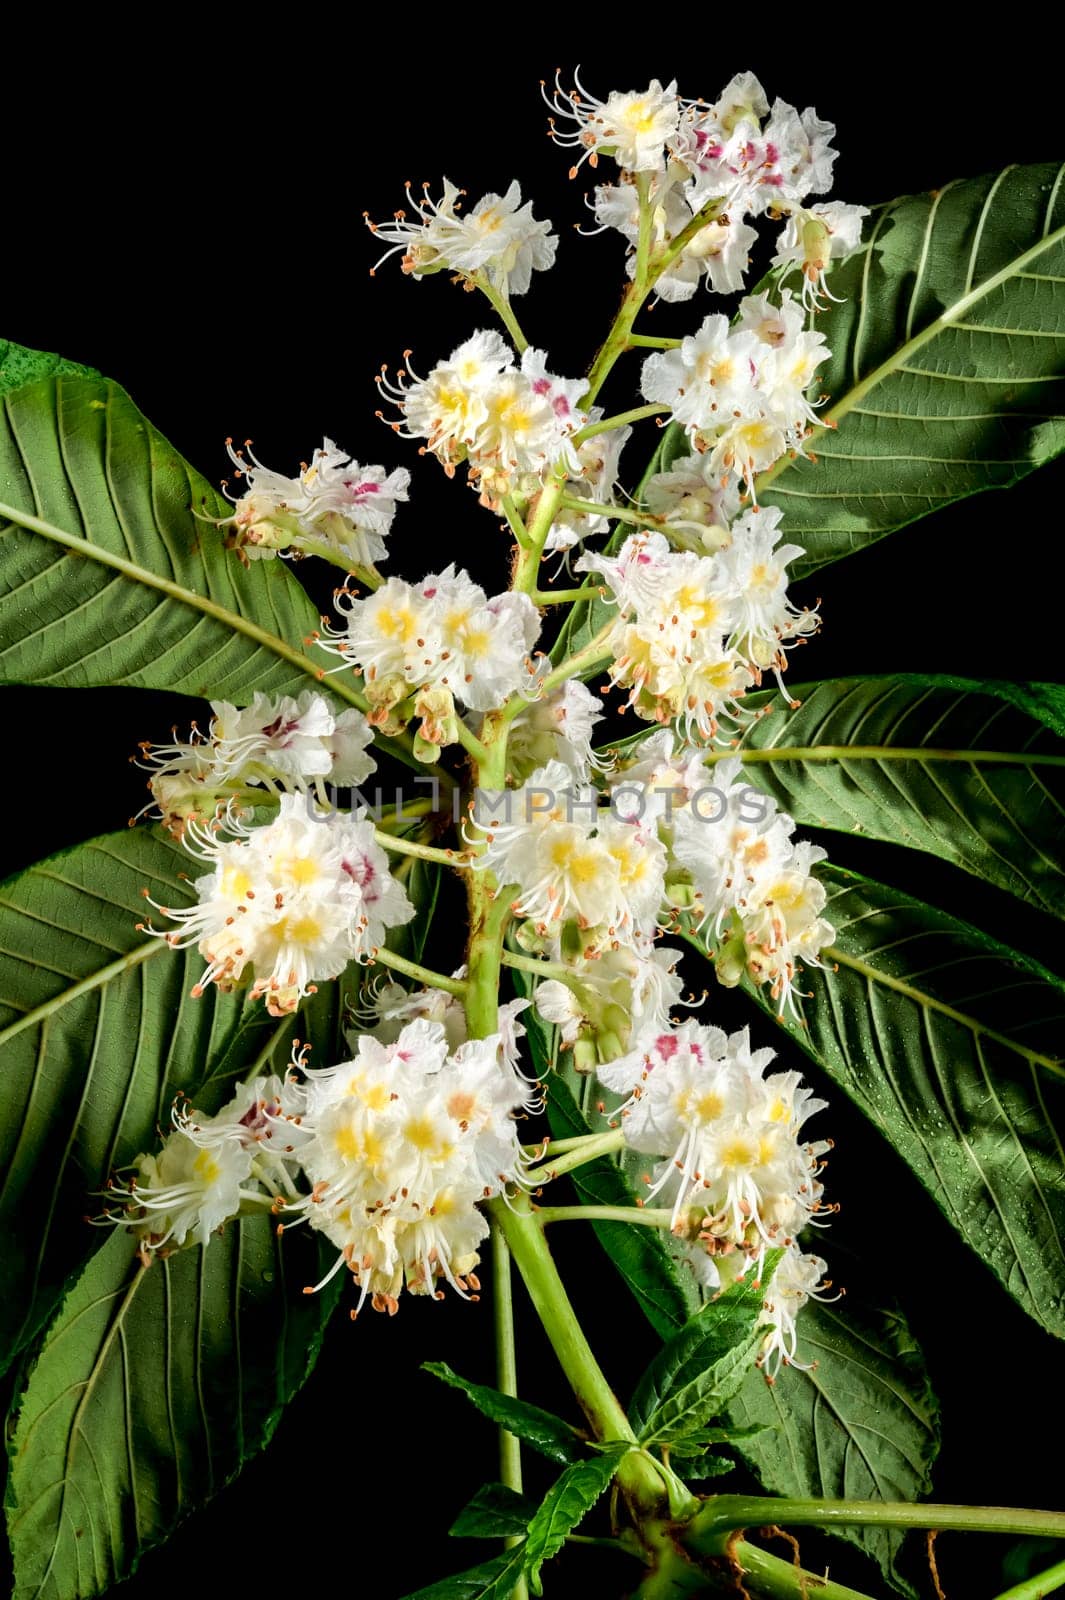 Blooming chestnut tree flowers on a black background by Multipedia